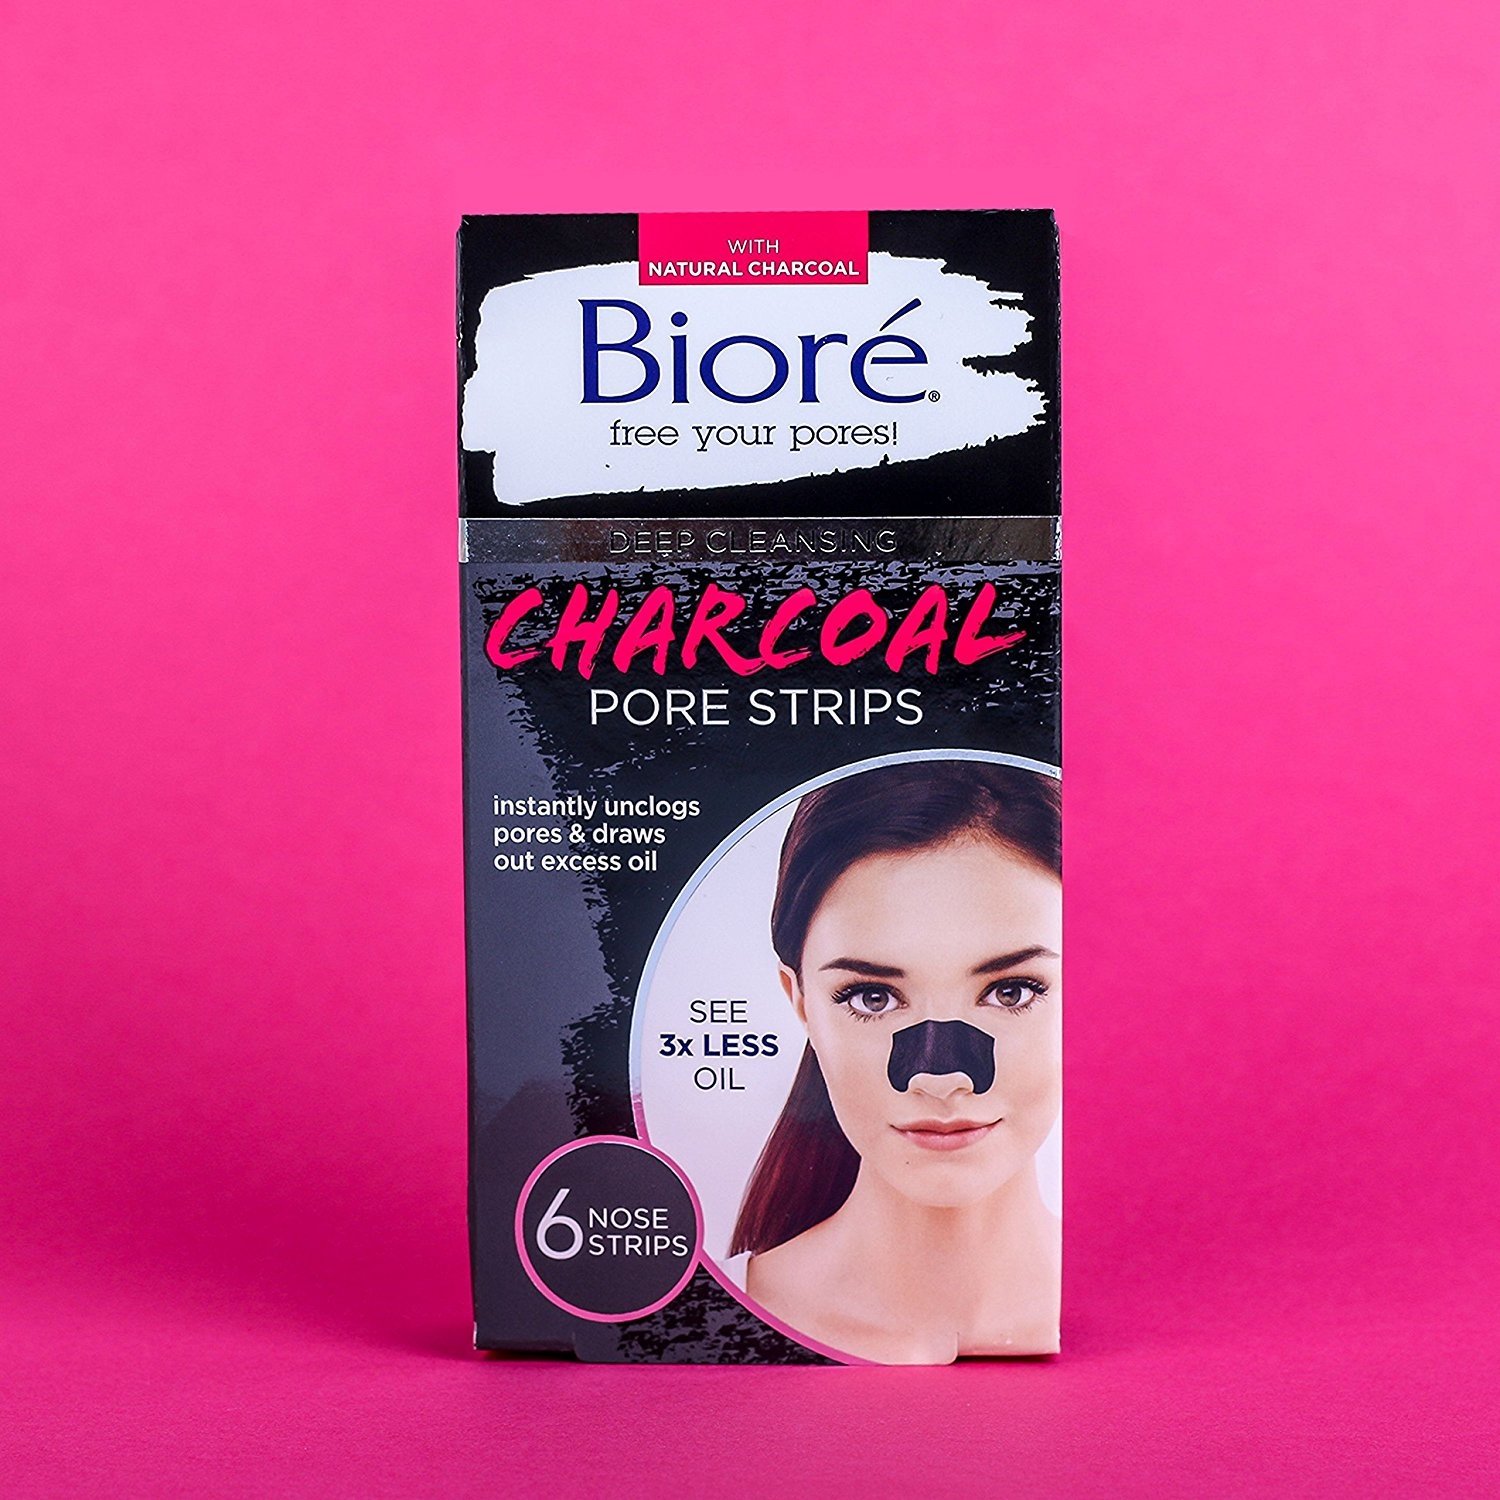 Biore Deep Cleansing Charcoal Pore Strips for Nose, 6 Count - image 3 of 6